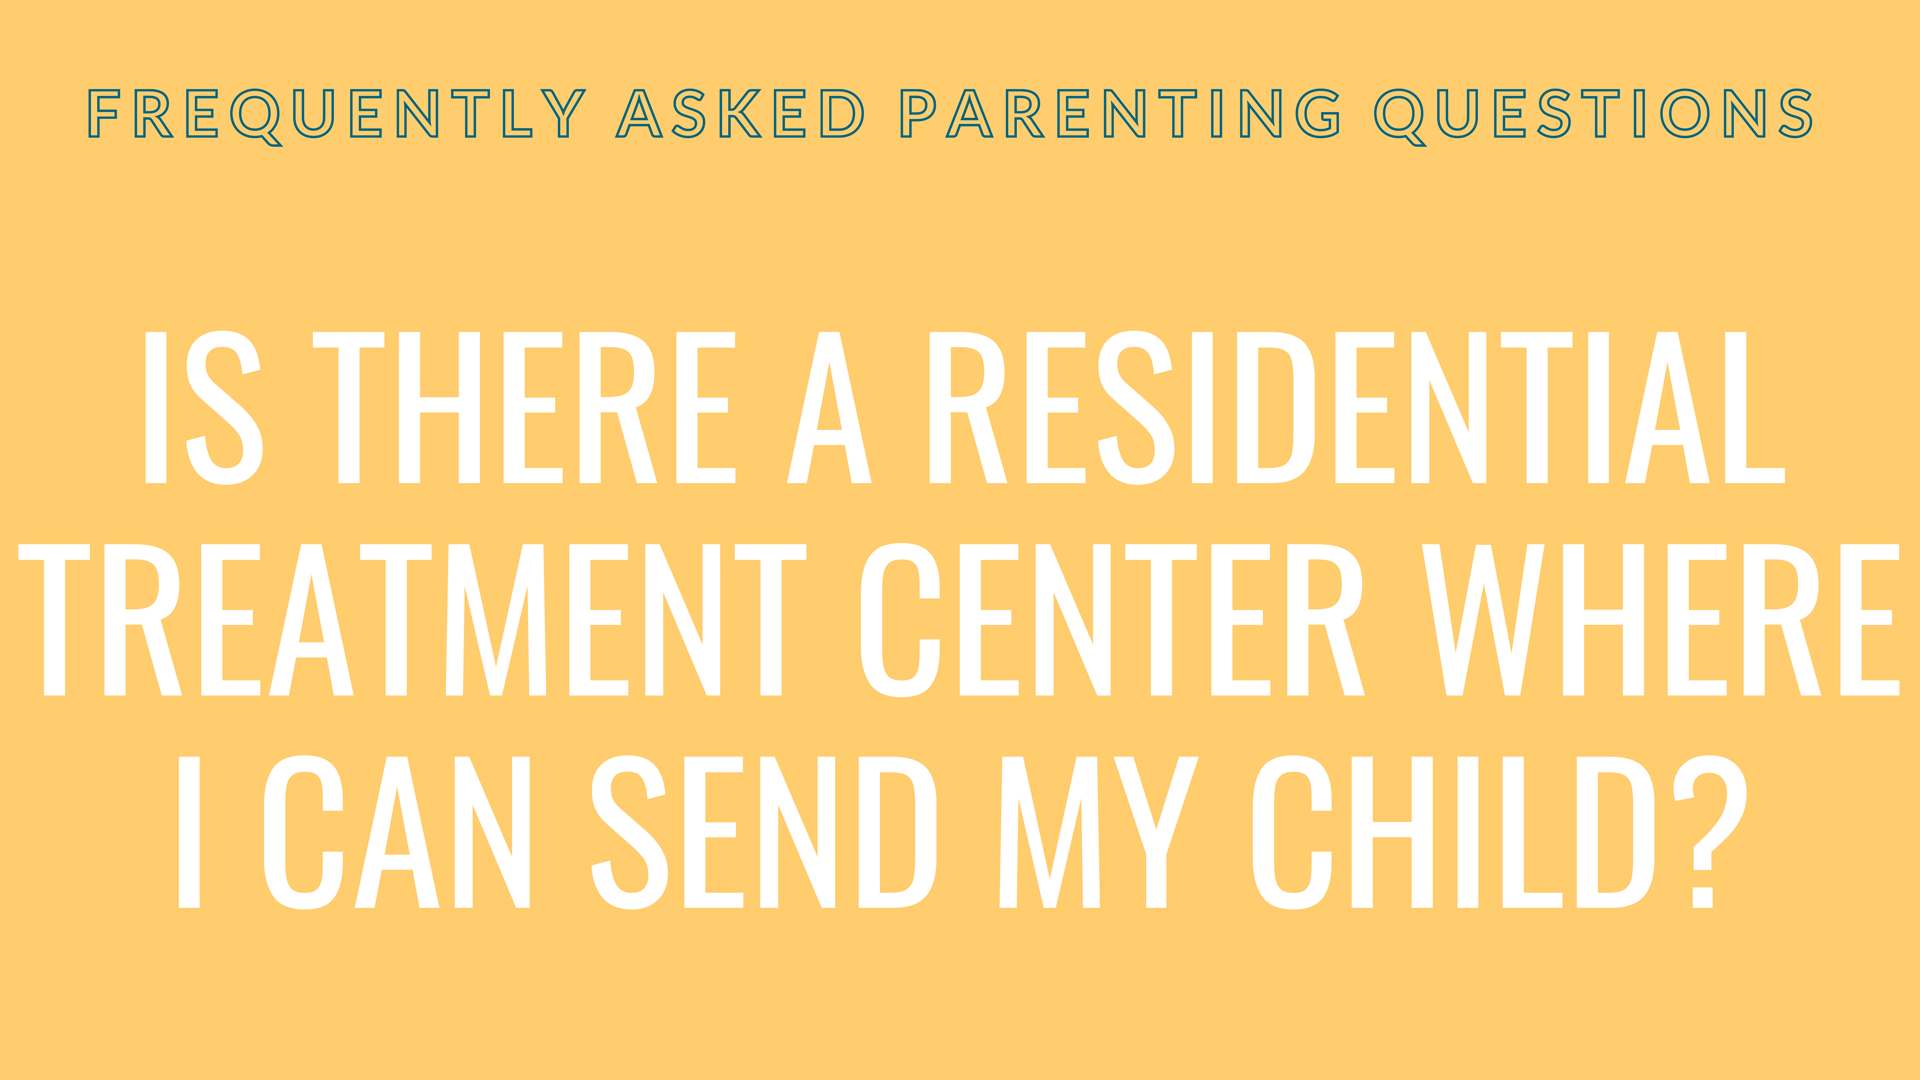 Is there a residential treatment center where I can send my child?